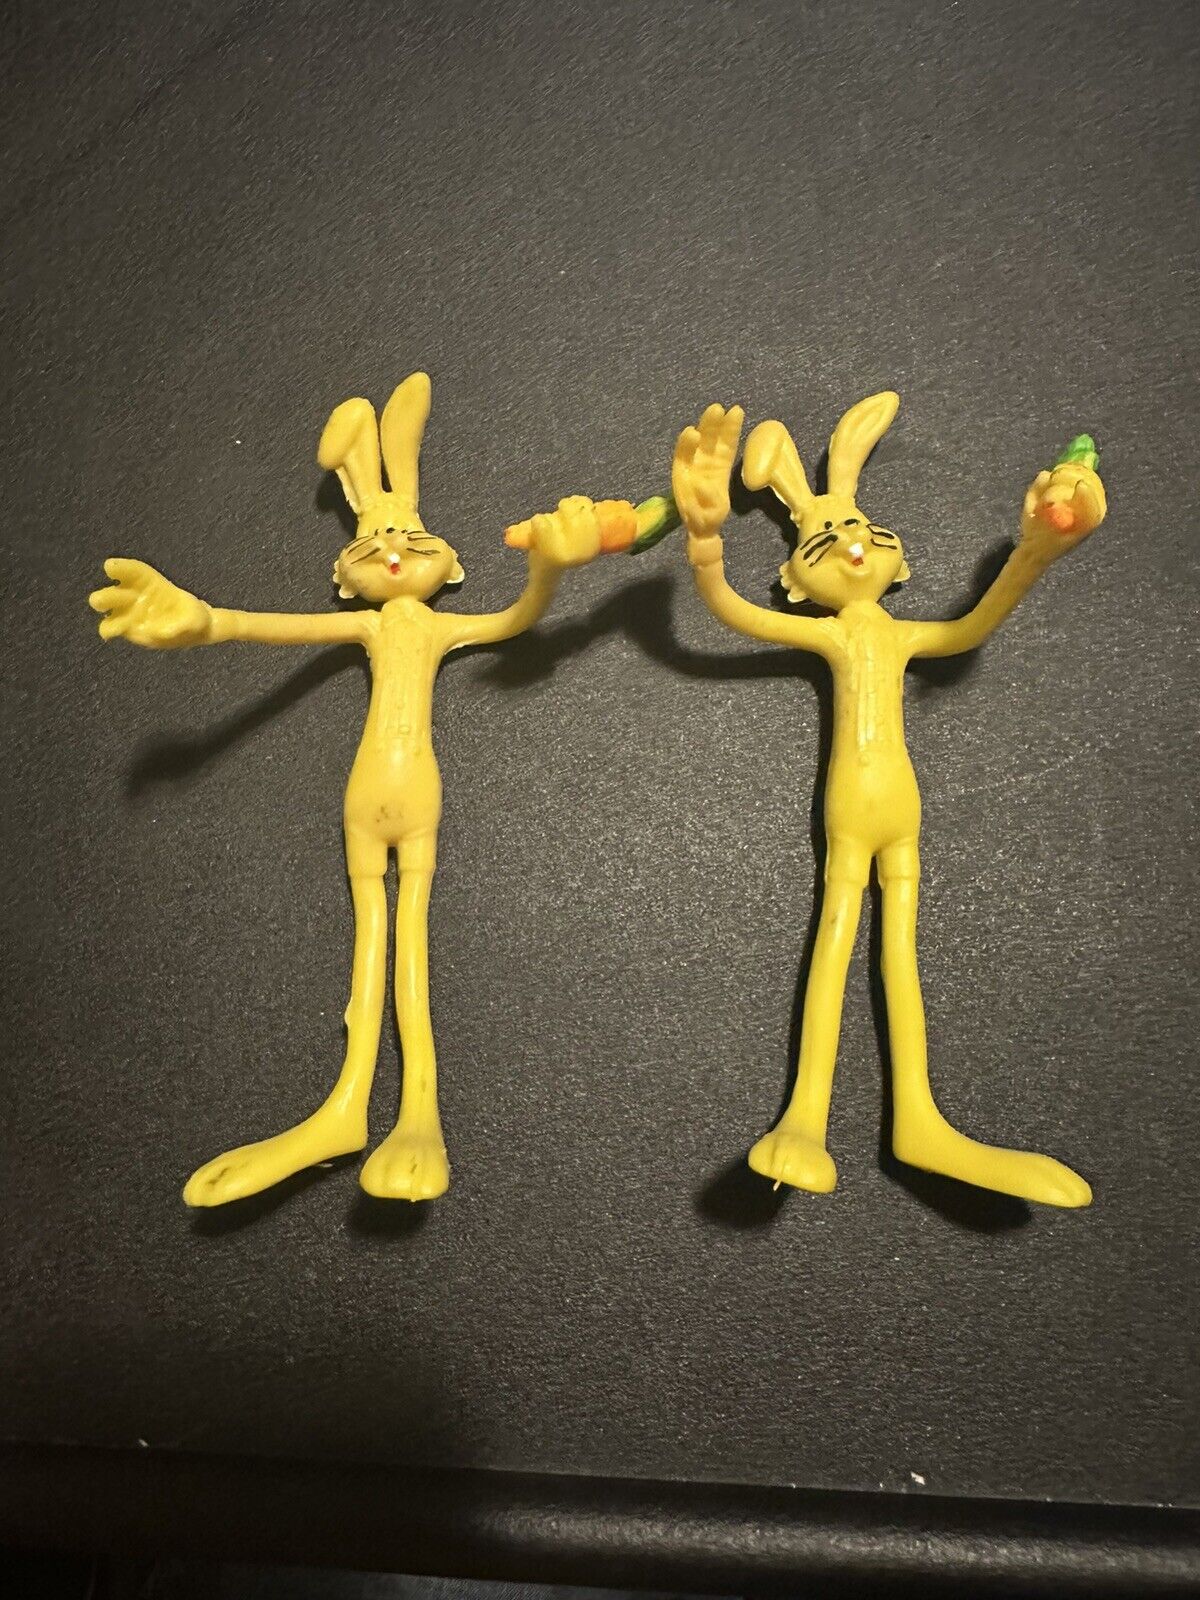 2 Vintage Yellow Bendy Bunnies W Carrot Bendable Wire & Rubber Bunny Rabbit Toys